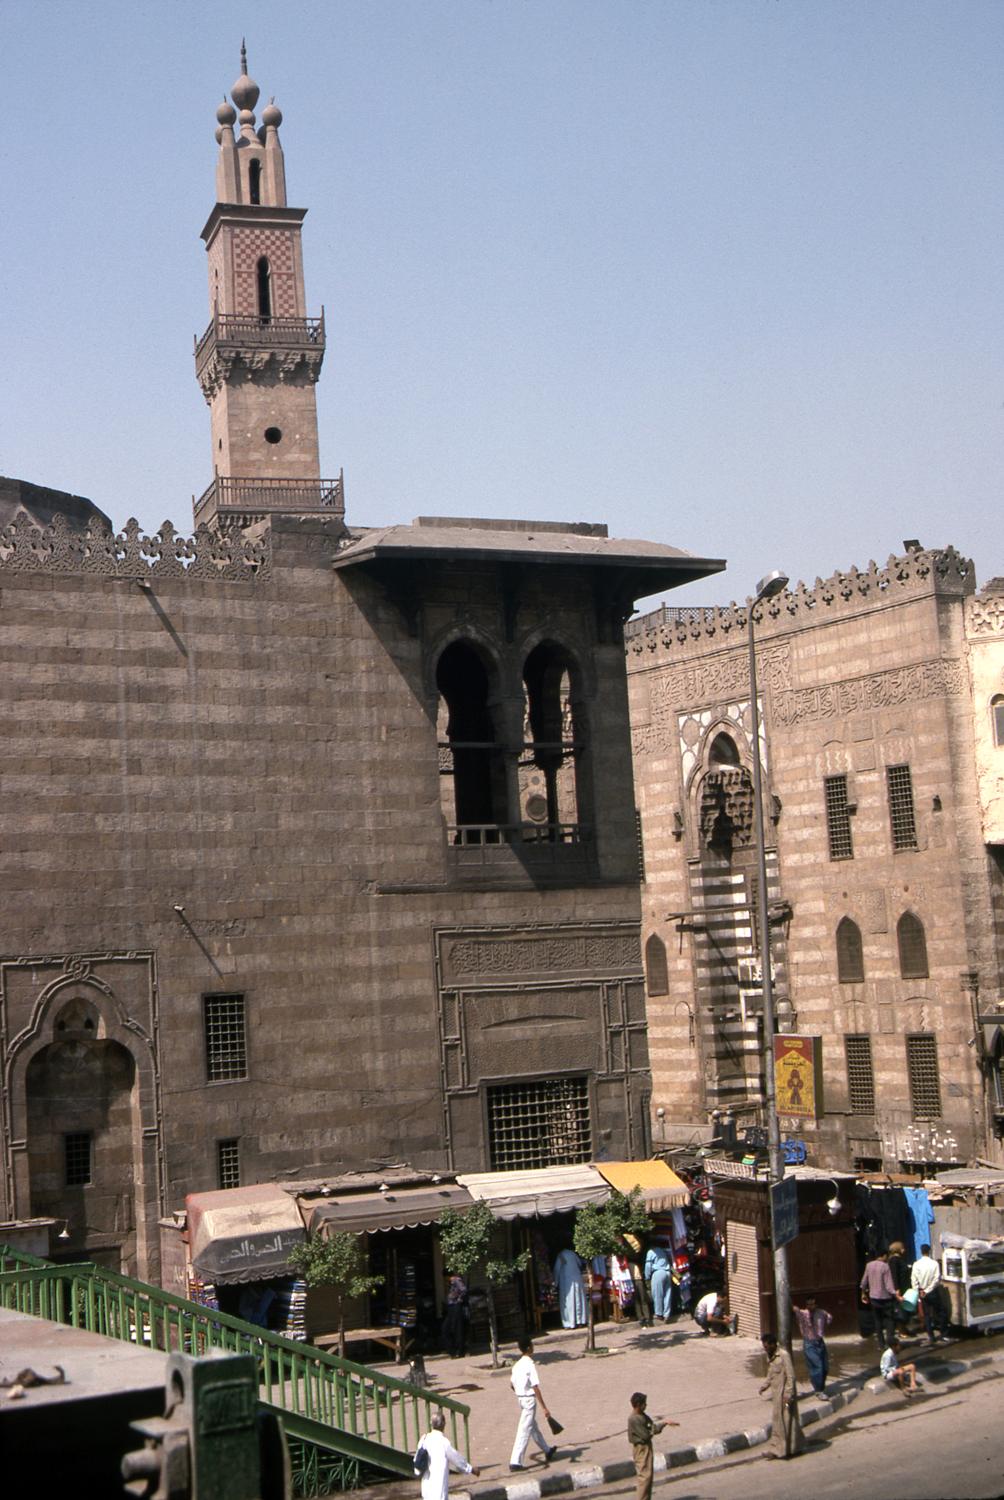 Exterior view looking southwest, showing mausoleum-sabil-kuttab (left) and mosque-madrasa (right)